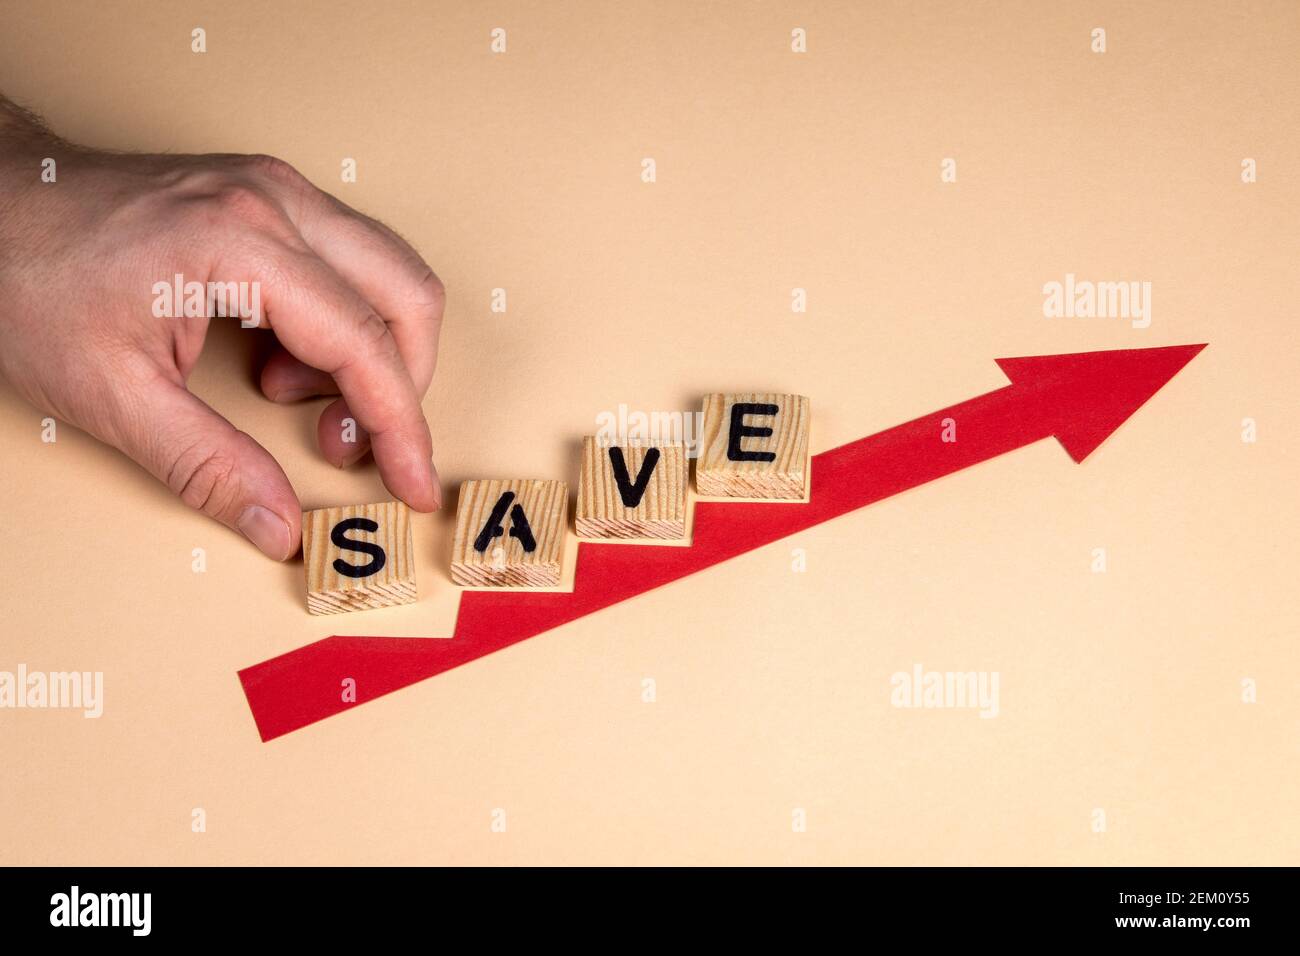 SAVE concept. Red arrow indicates the development and growth. Stock Photo